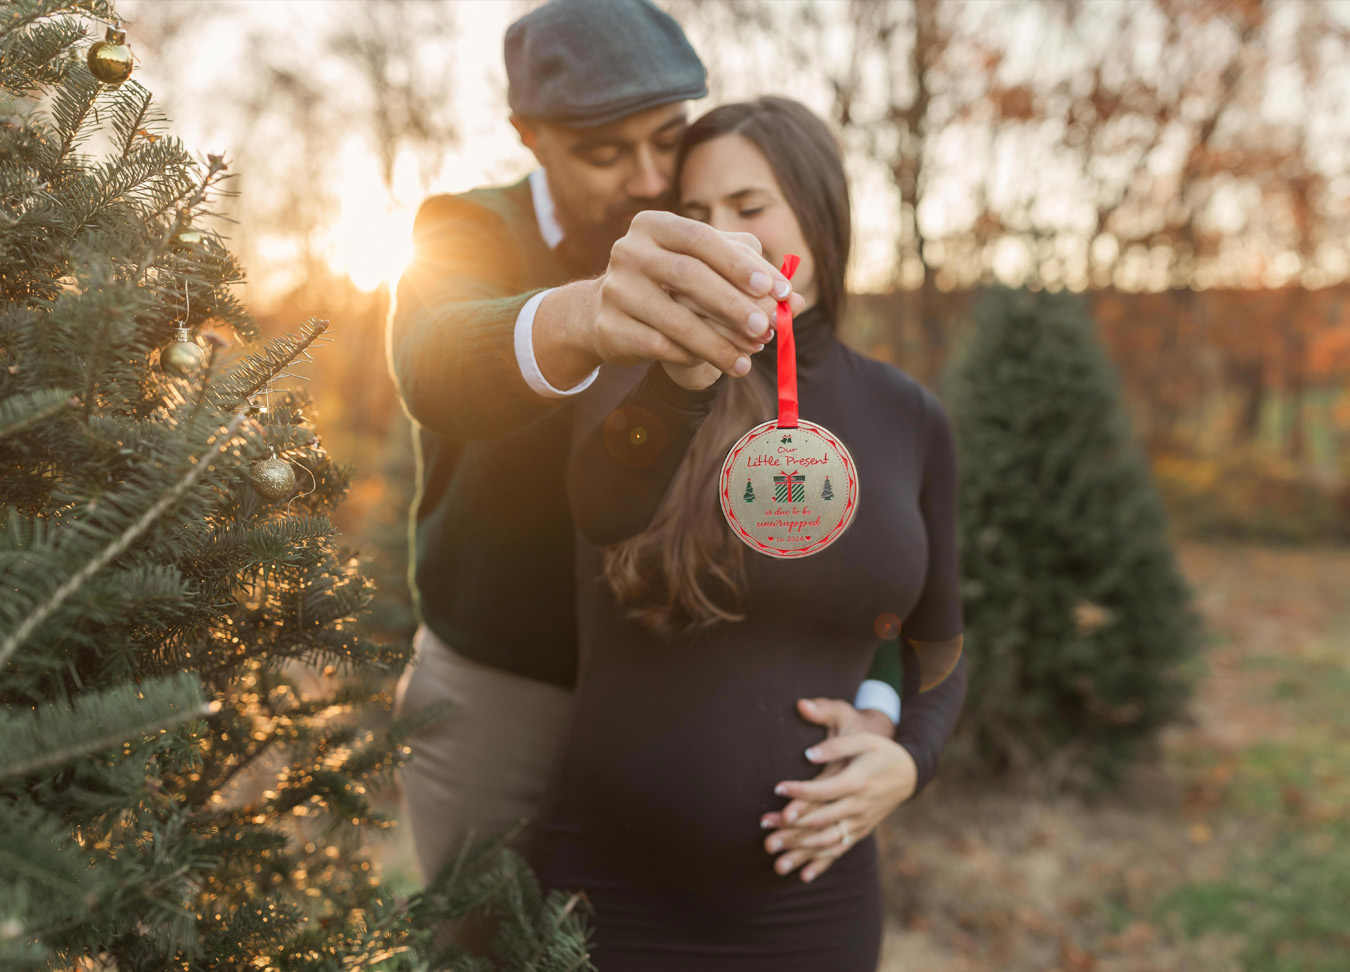 Christmas Maternity Photoshoot in Northern Virginia captured by a nothern virginia maternity photographer.